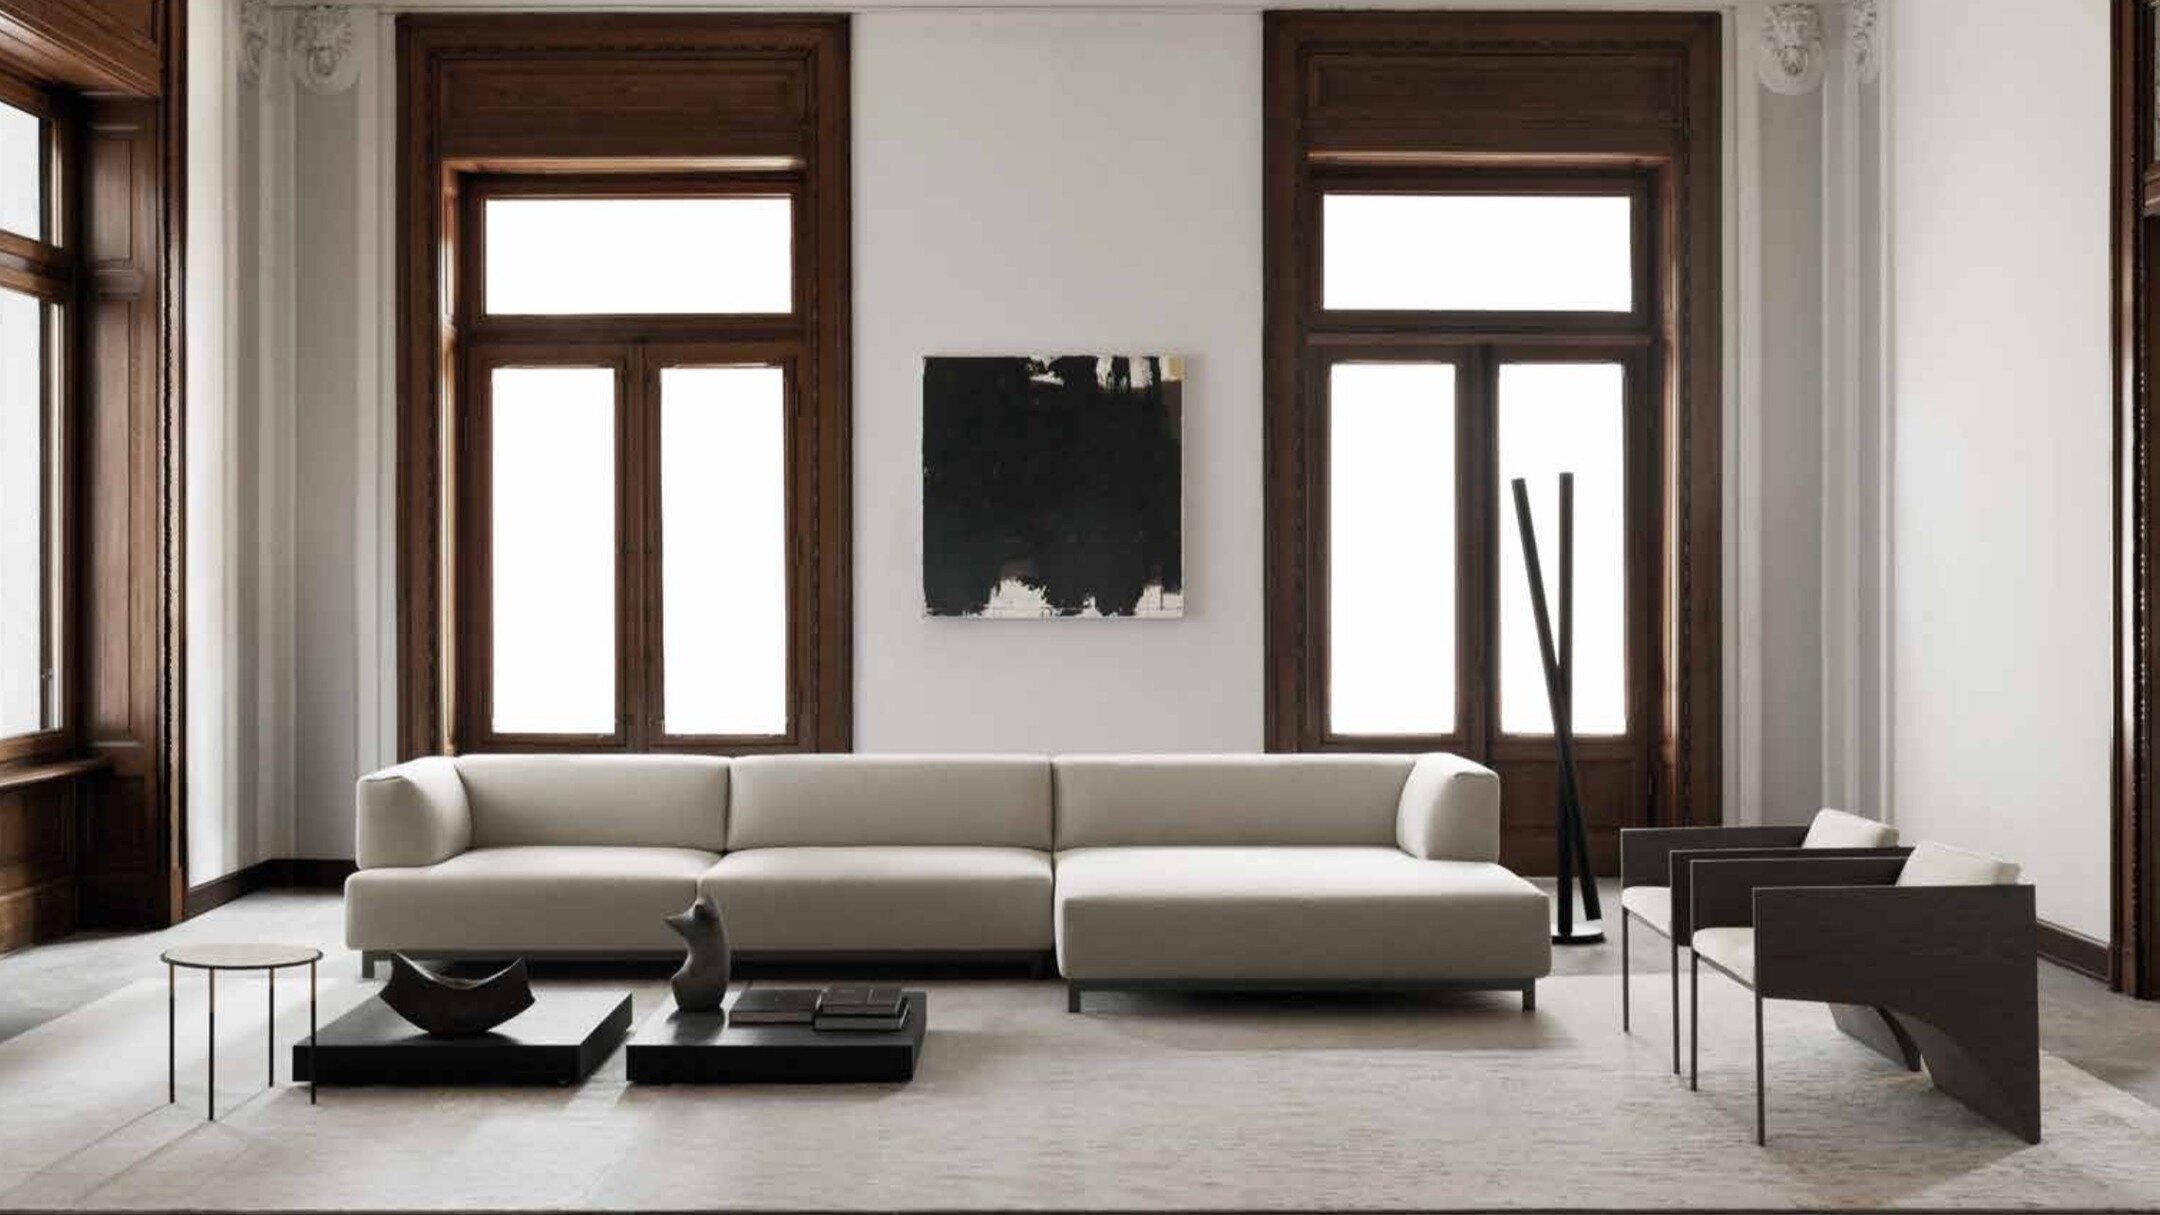 Perfect, harmonious proportions and a sense of understated luxury: distinguishing features of Living Divani. @livingdivani | Discover at Vecchio Home